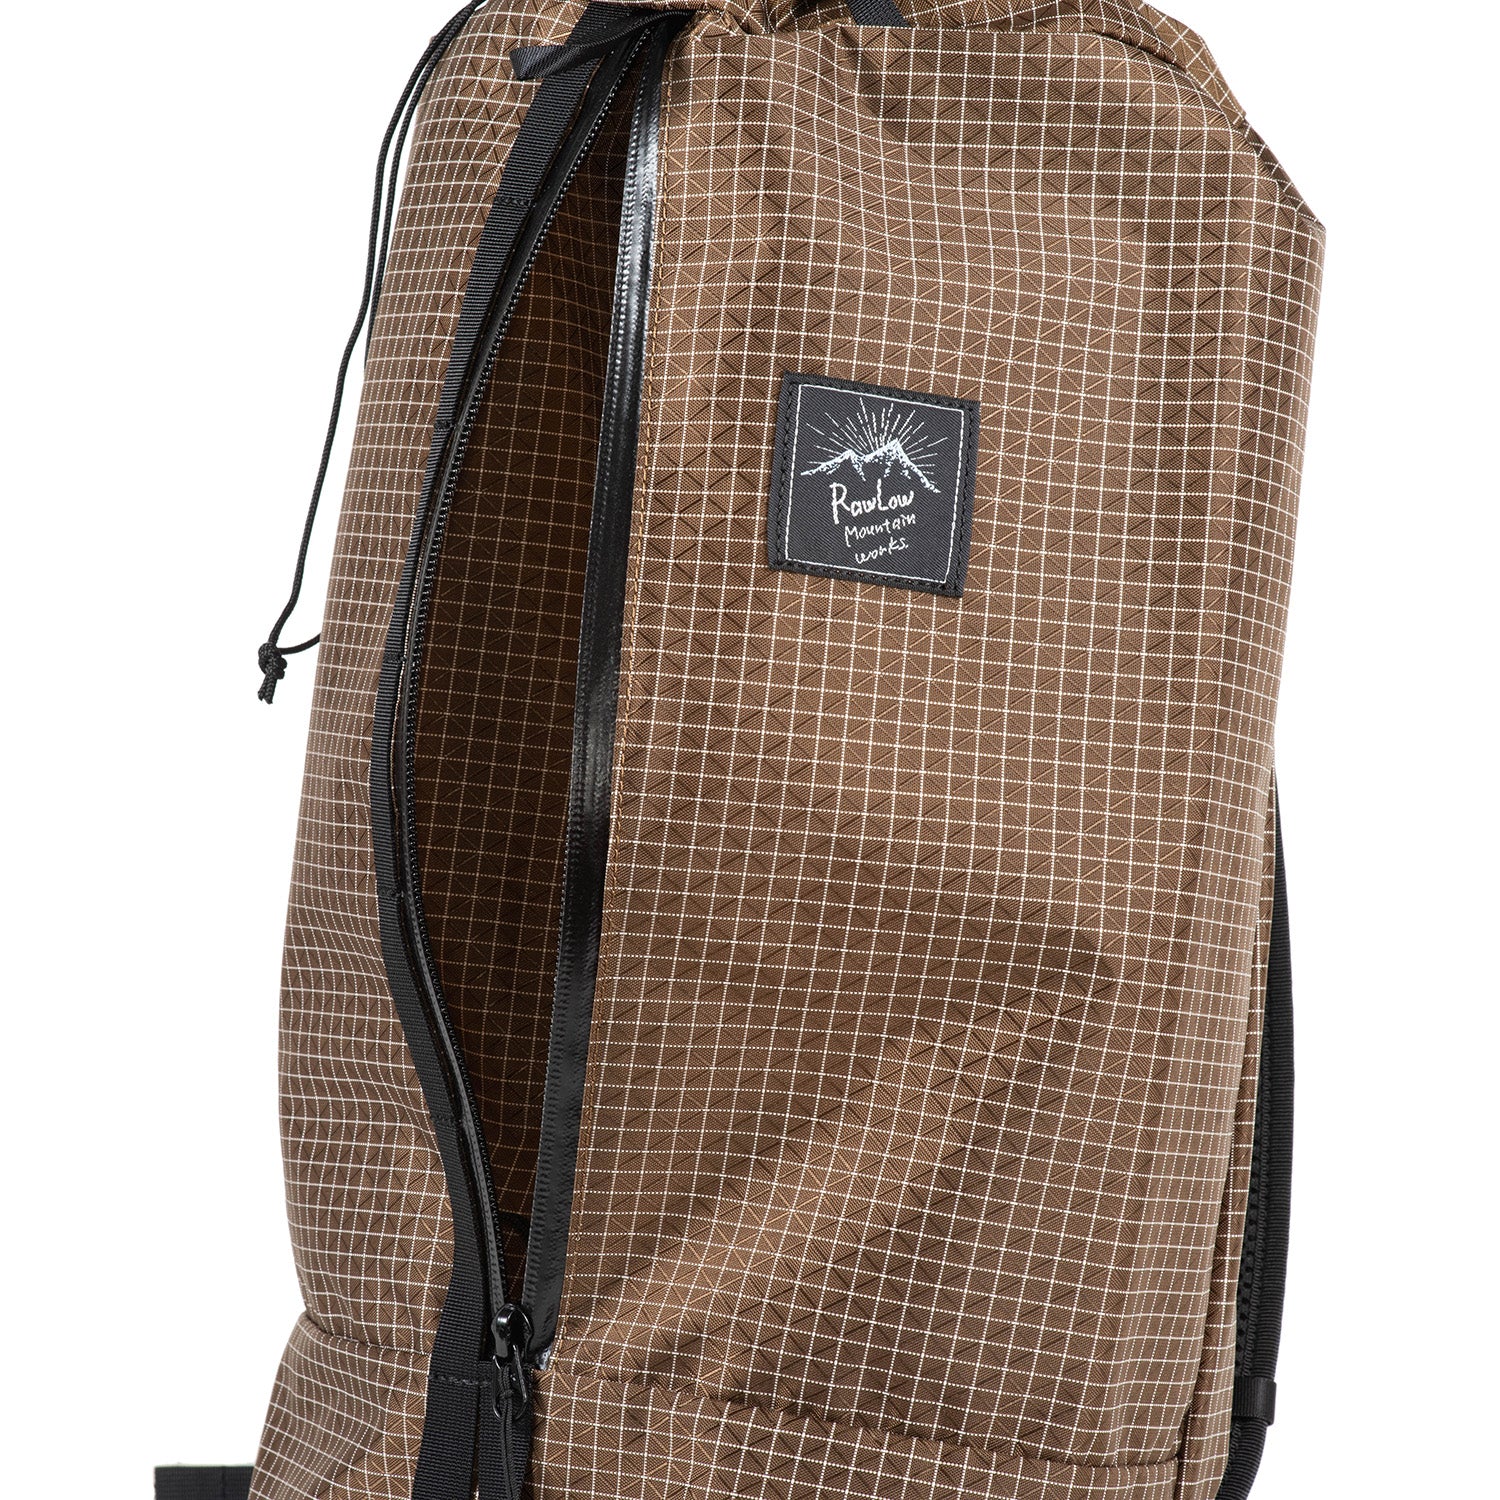 RAWLOW MOUNTAIN WORKS Cocoon Pack "SPECTRA"